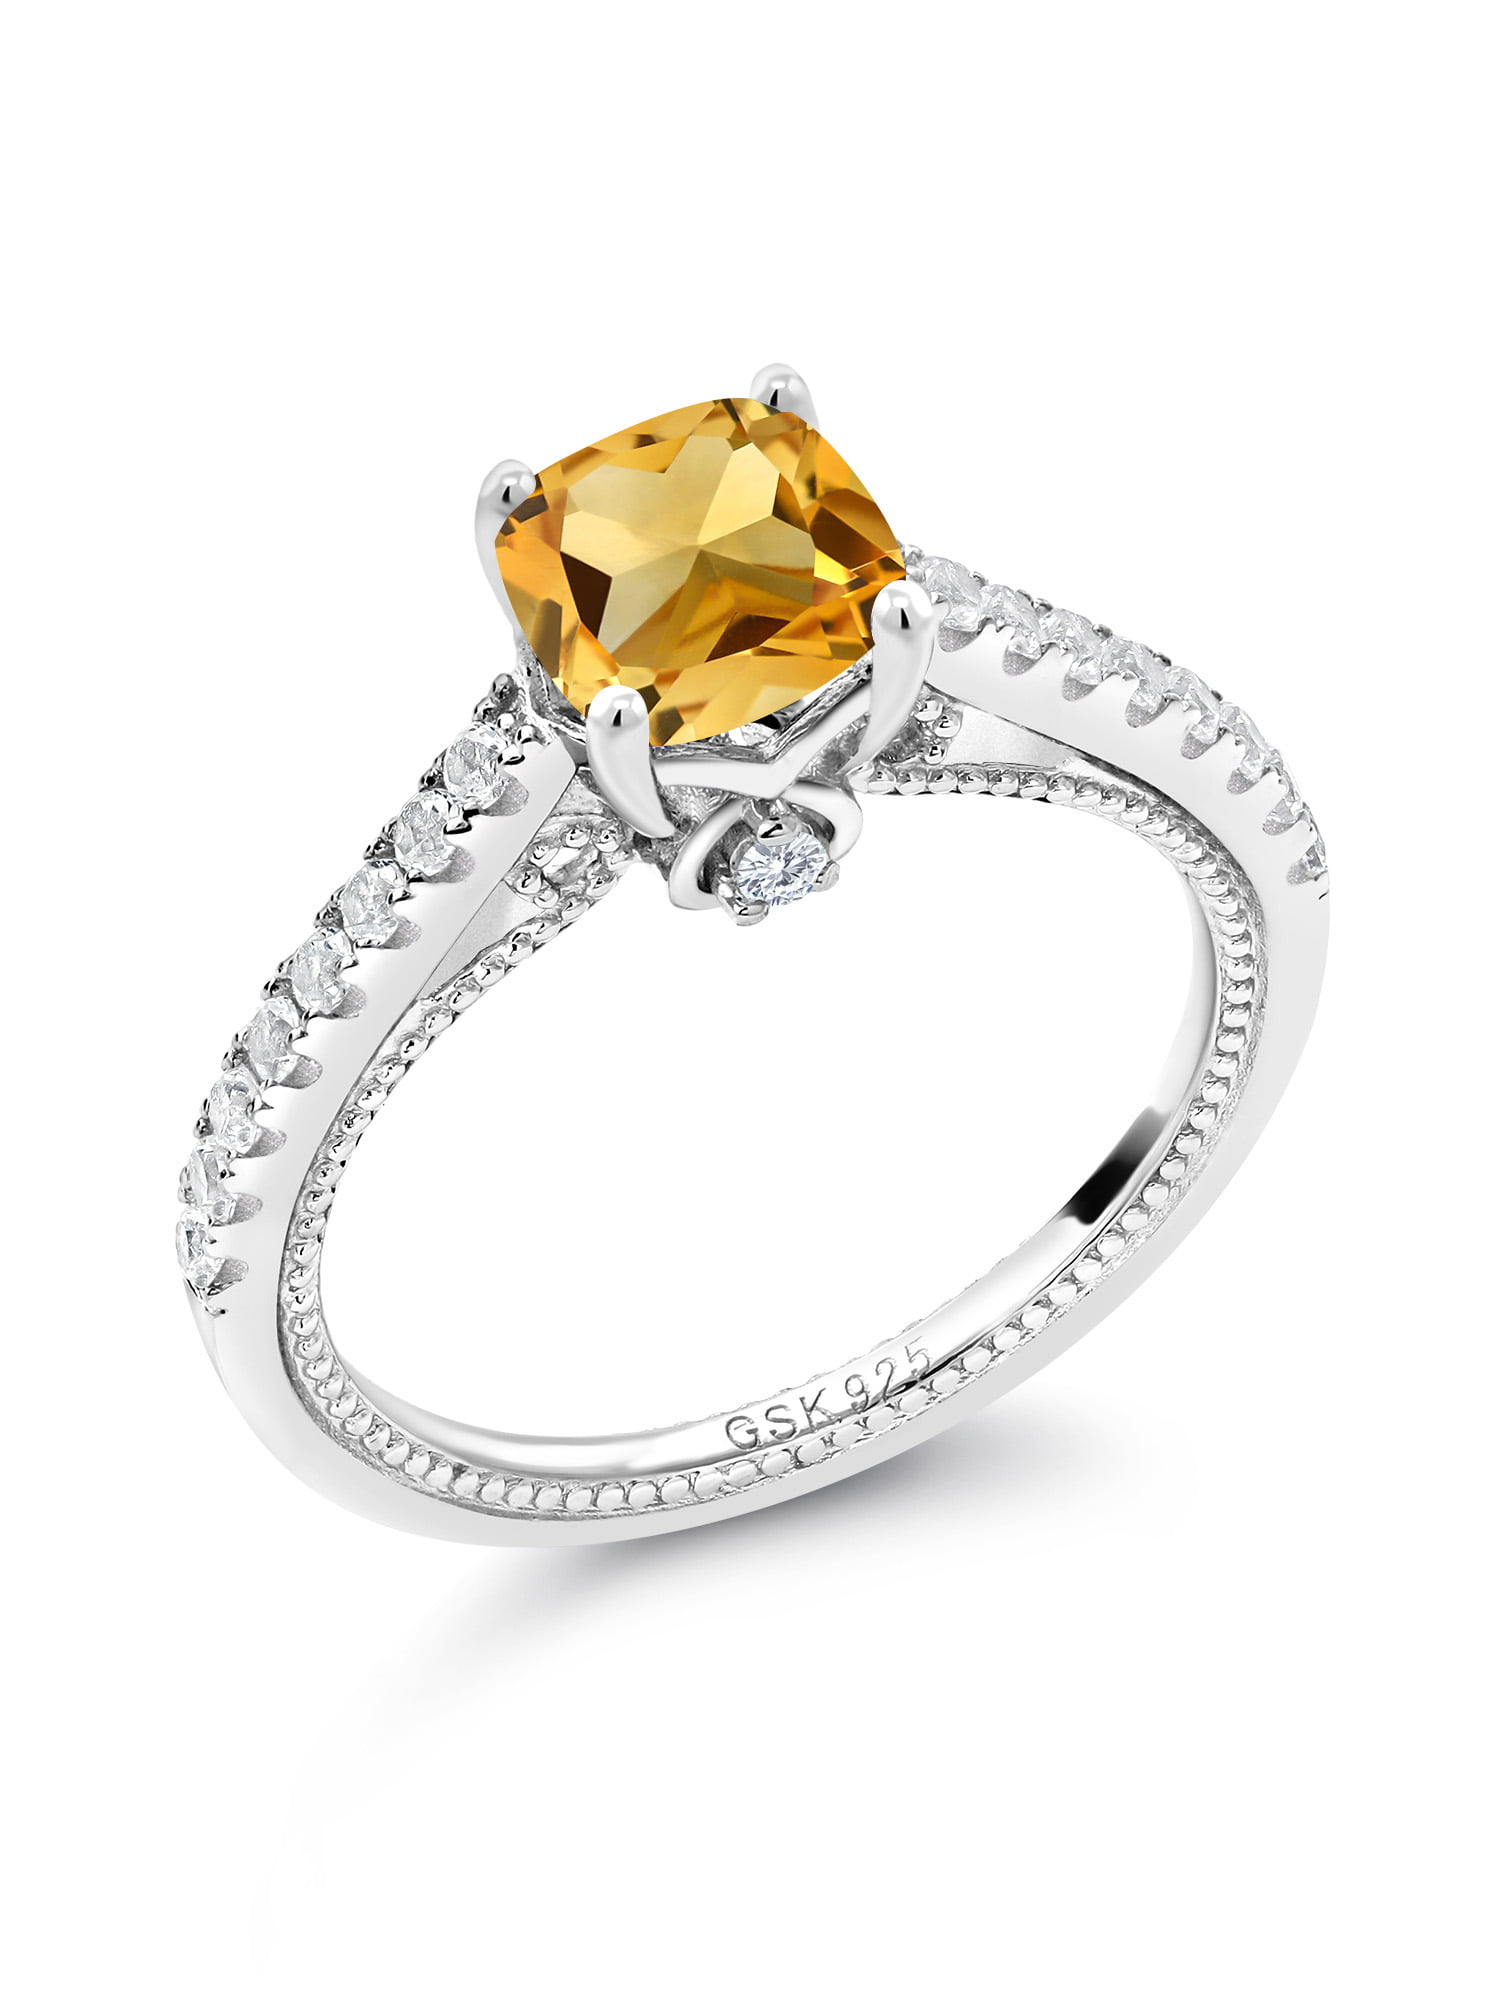 Gem Stone King 925 Sterling Silver Yellow Citrine Women Engagement Ring 8.50 Cttw, Gemstone Birthstone, Available in size 5, 6, 7, 8, 9 